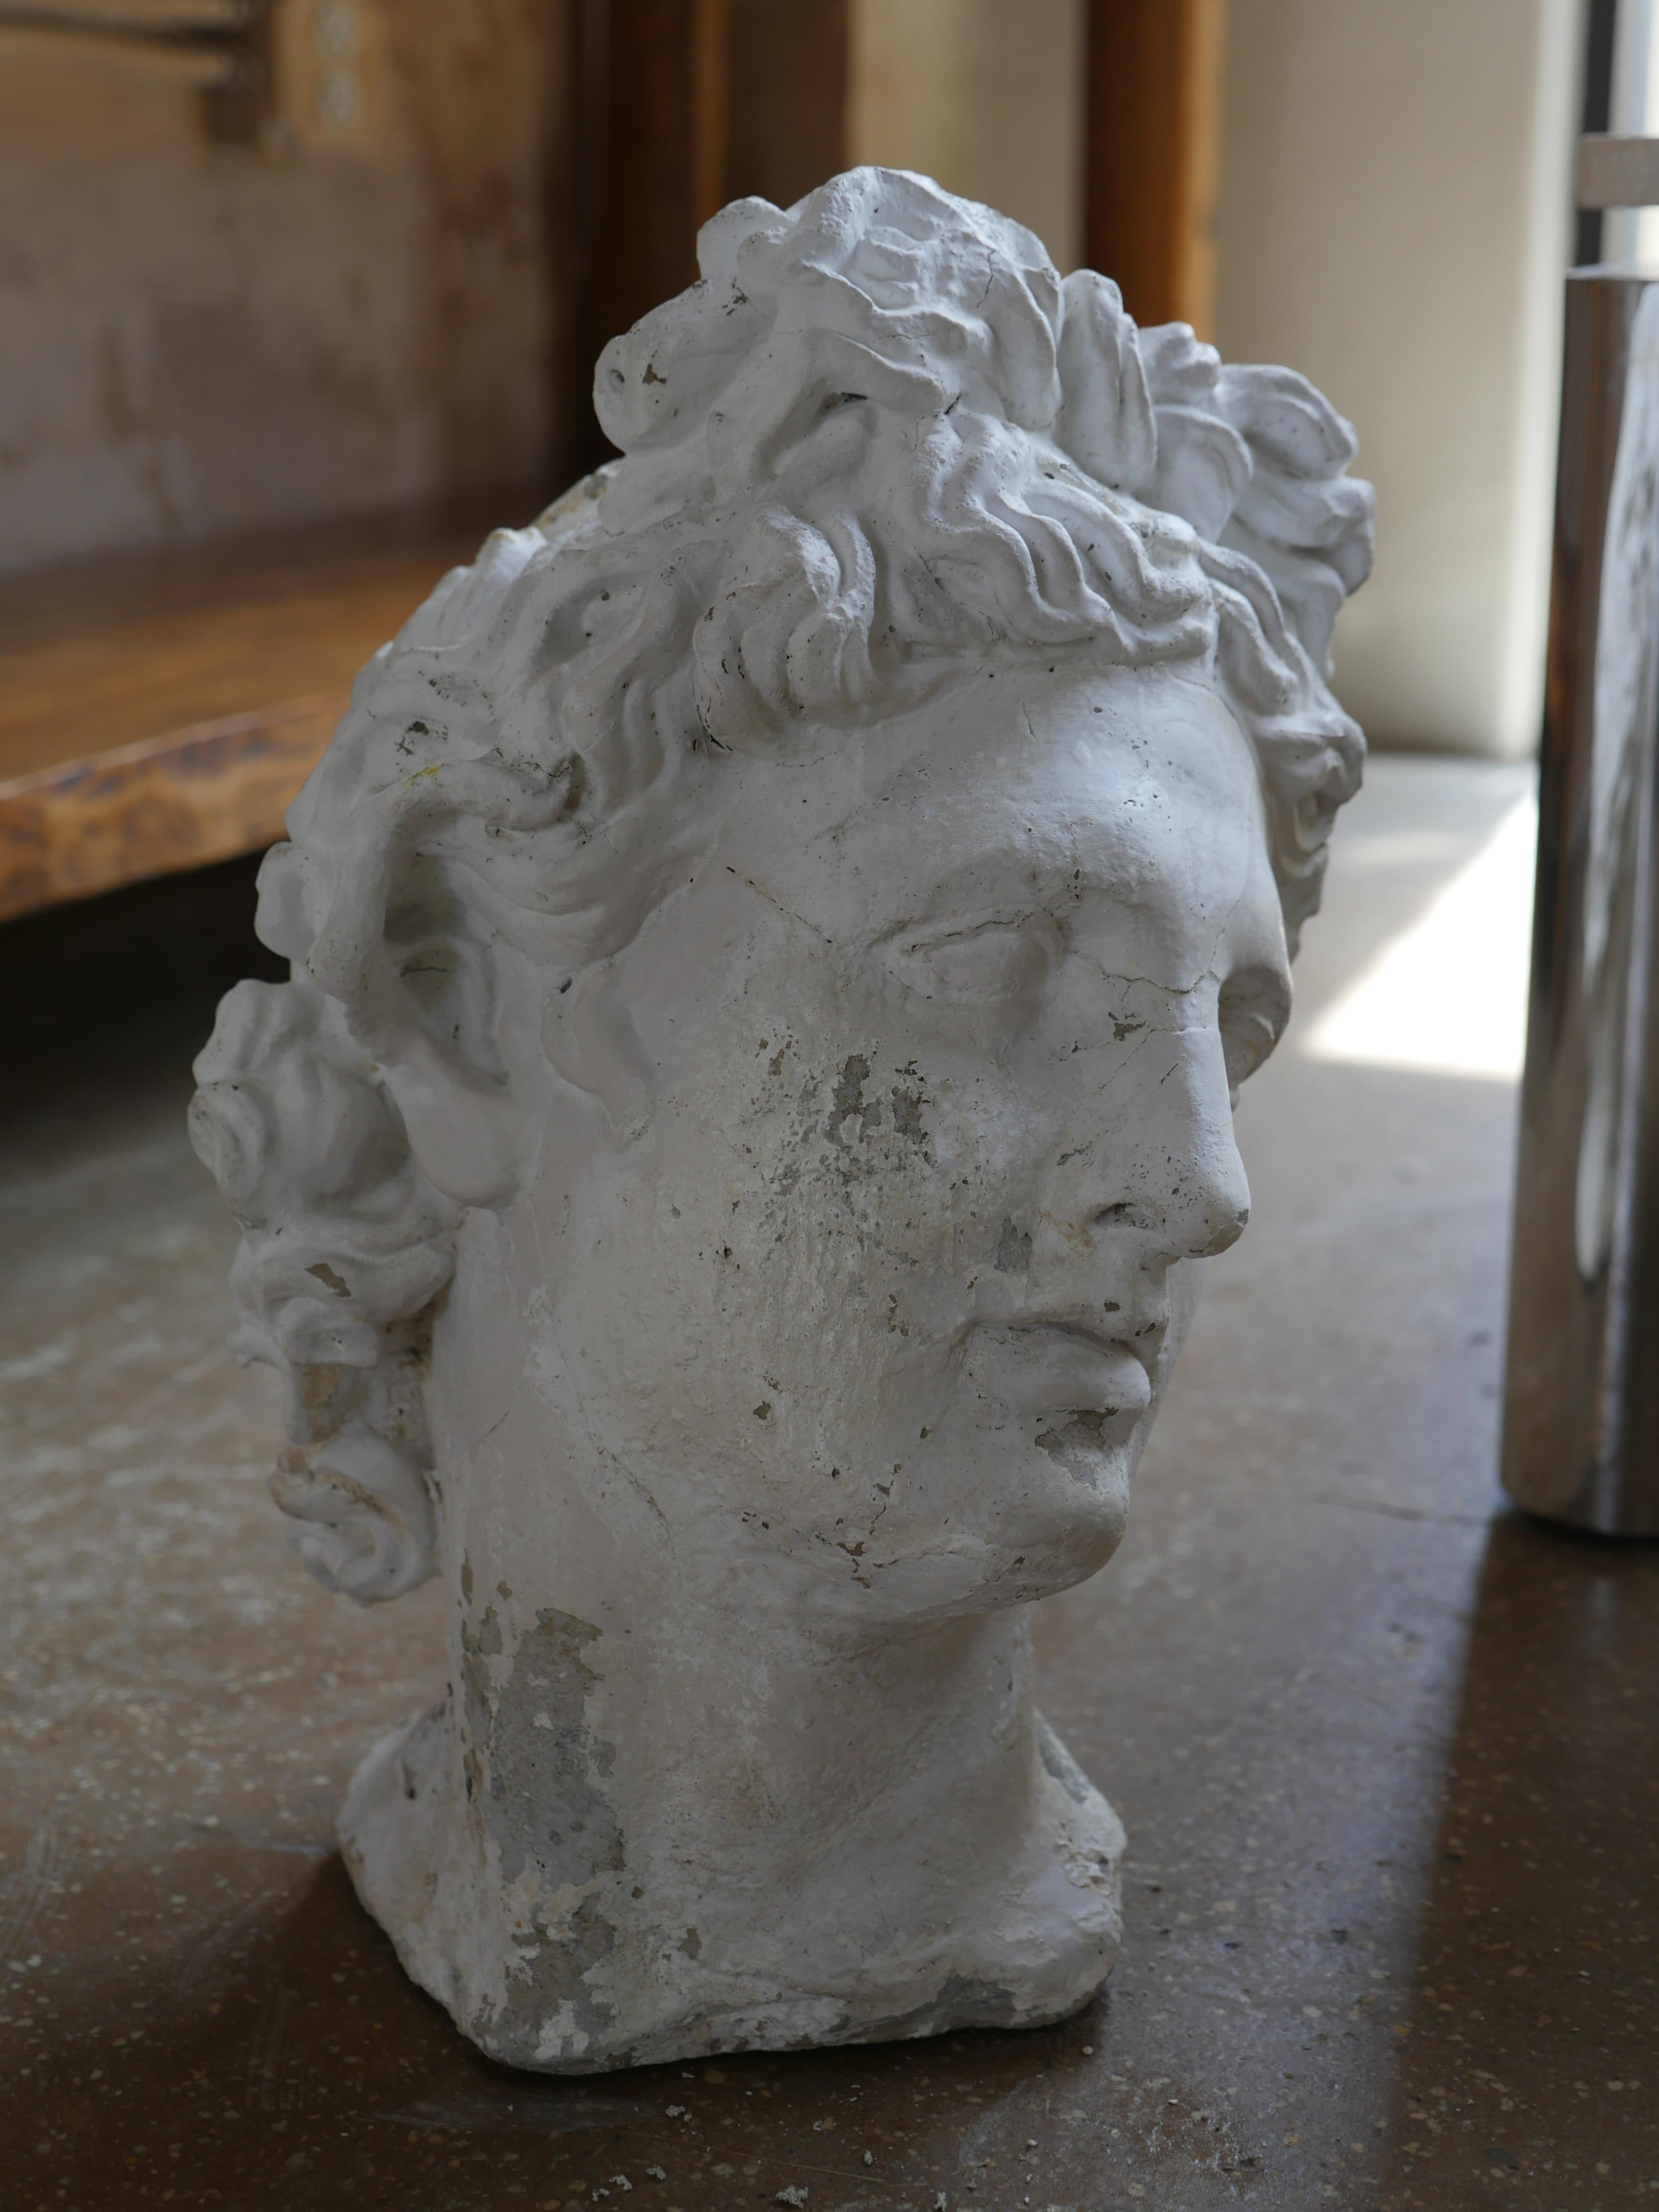 This vintage 1980s cast stone bust is a beautiful representation of Apollo Belvedere, with intricate detail and lifelike features that capture his essence. This piece would make a stunning addition to any room styled on a pedestal, credenza or table.